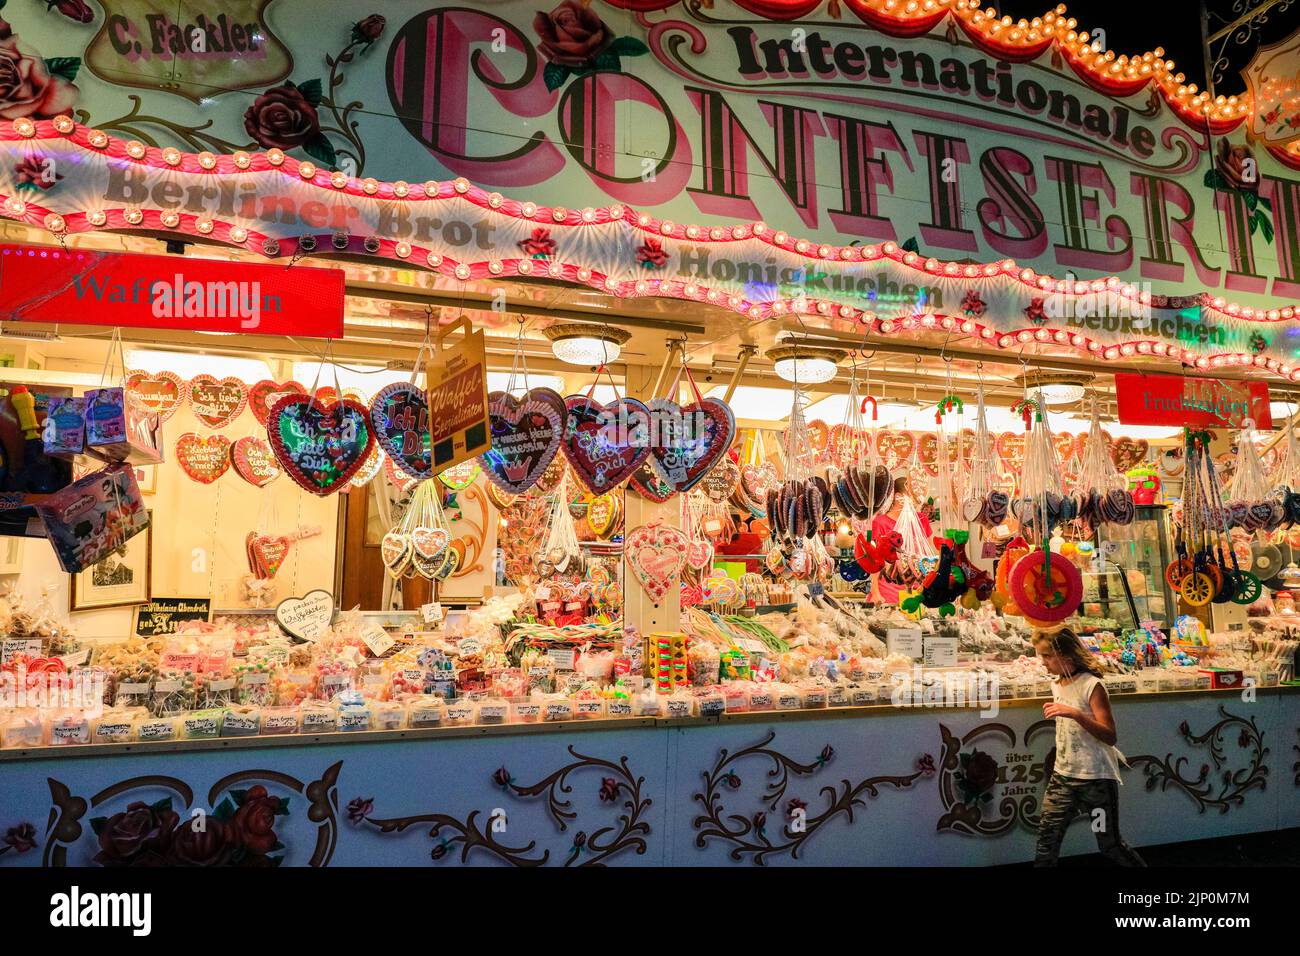 Herne, NRW, Germany. 14th Aug, 2022. The sweets stalls are brimming with treats that are hard to resist to the younger visitors. Cranger Kirmes, Germany's 3rd largest funfair with a tradition dating back to the middle ages, has returned to pre-pandemic visitor numbers with more than 3.9m attending in hot, sunny weather, enjoying the rides, rollercoasters, beer halls, food and drink. The funfair concluded tonight with fireworks over the nearby Rhine-Herne Canal. Credit: Imageplotter/Alamy Live News Stock Photo